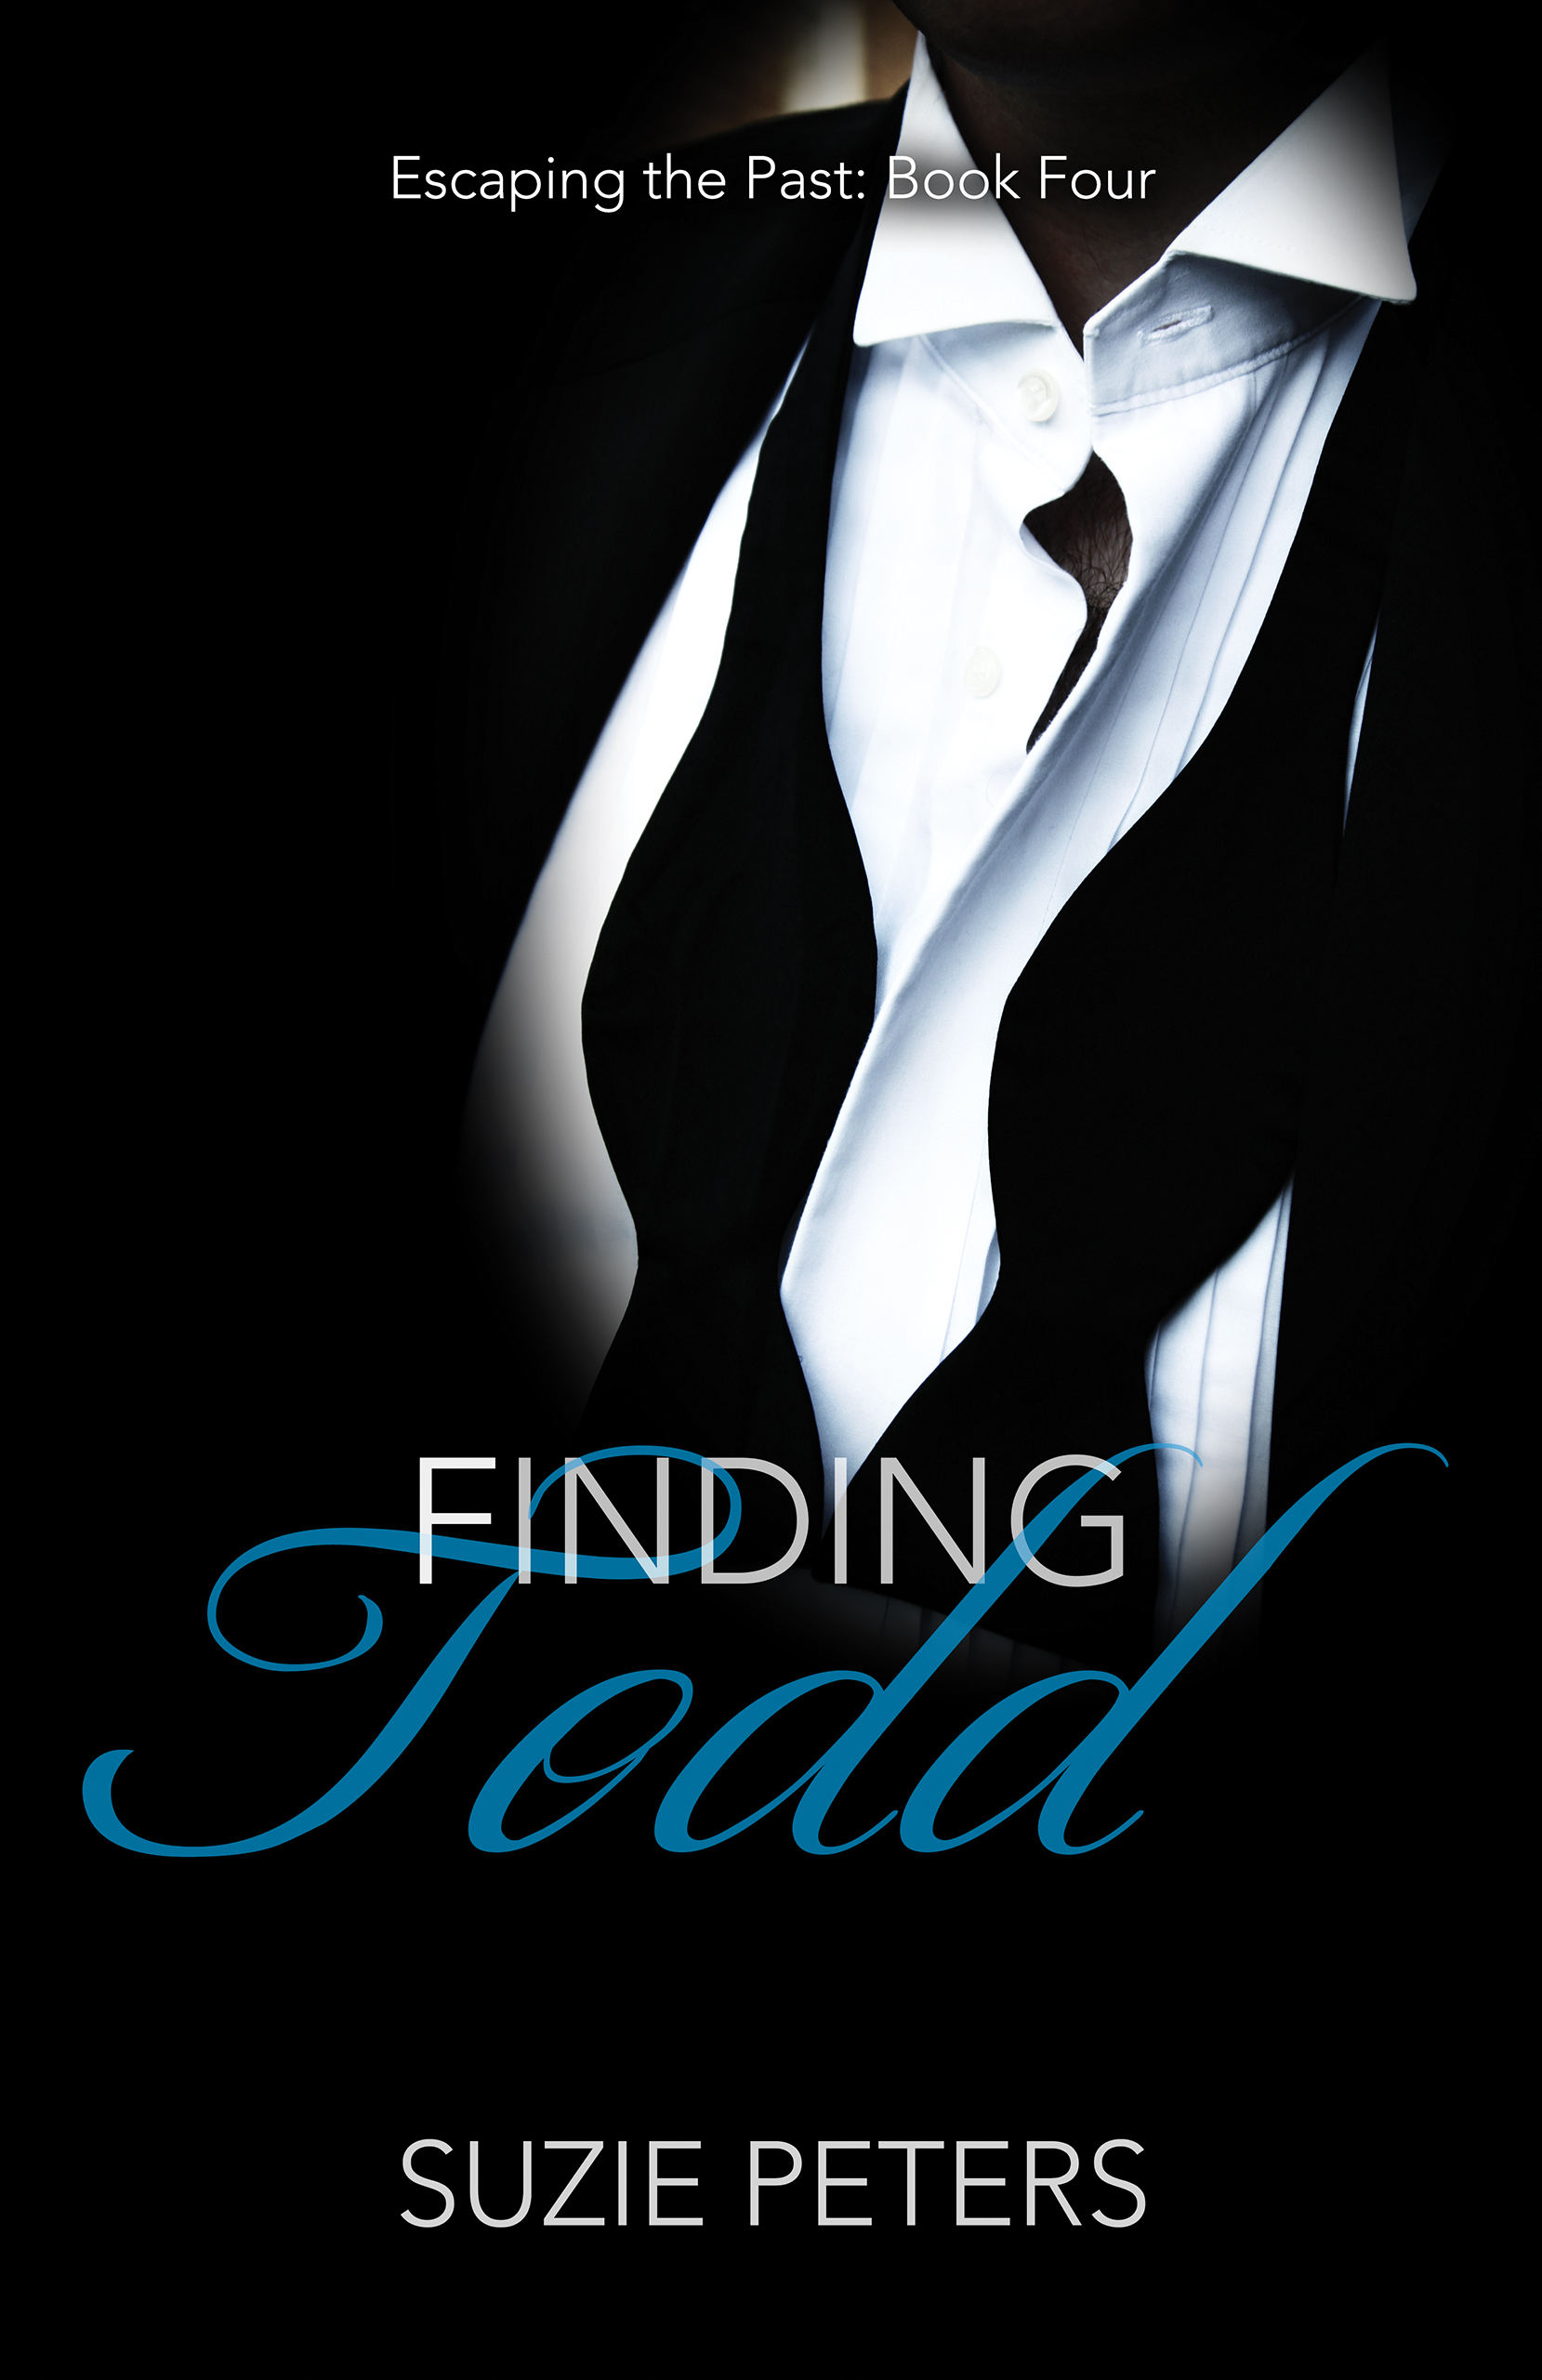 Finding Todd by Suzie Peters front cover image.